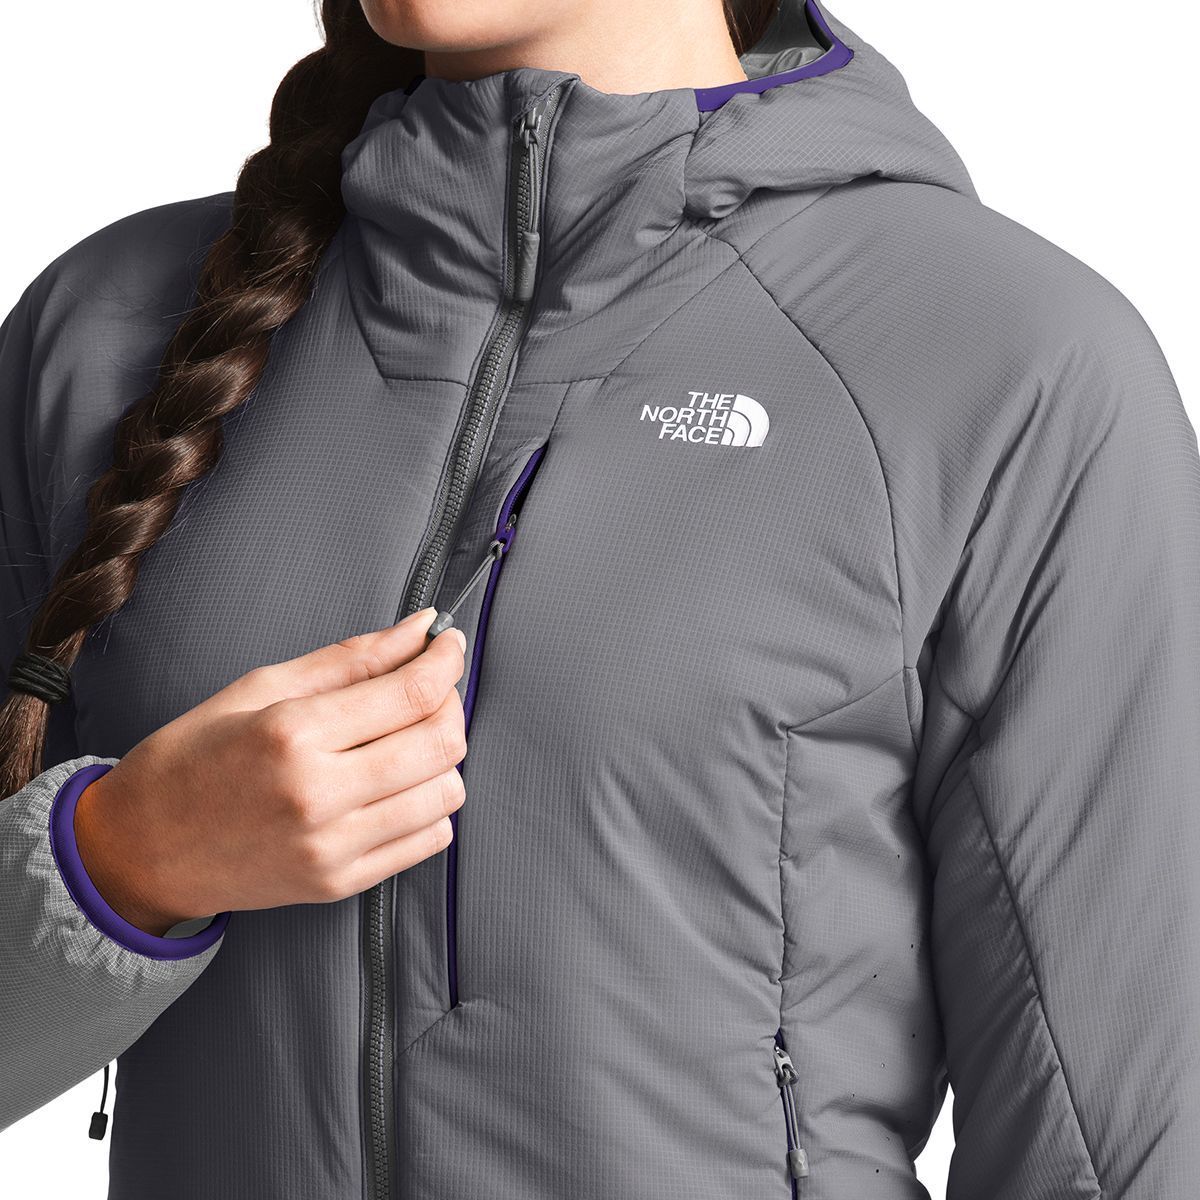 the north face ventrix hoodie women's